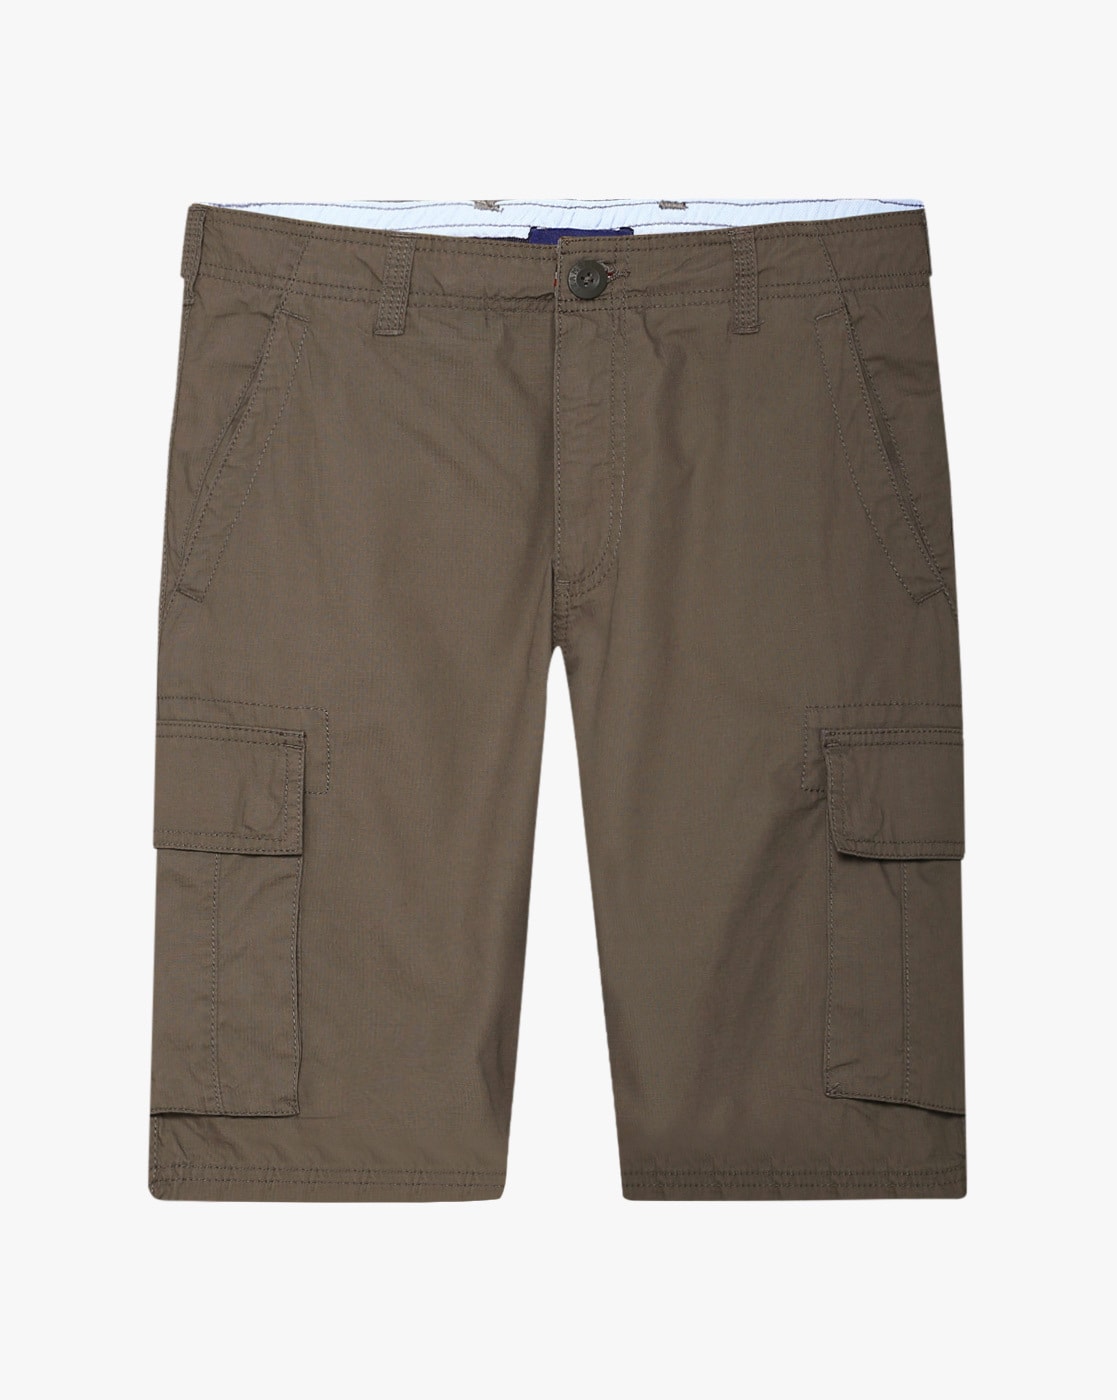 Buy Olive Green Shorts & 3/4ths for Men by Teamspirit Online